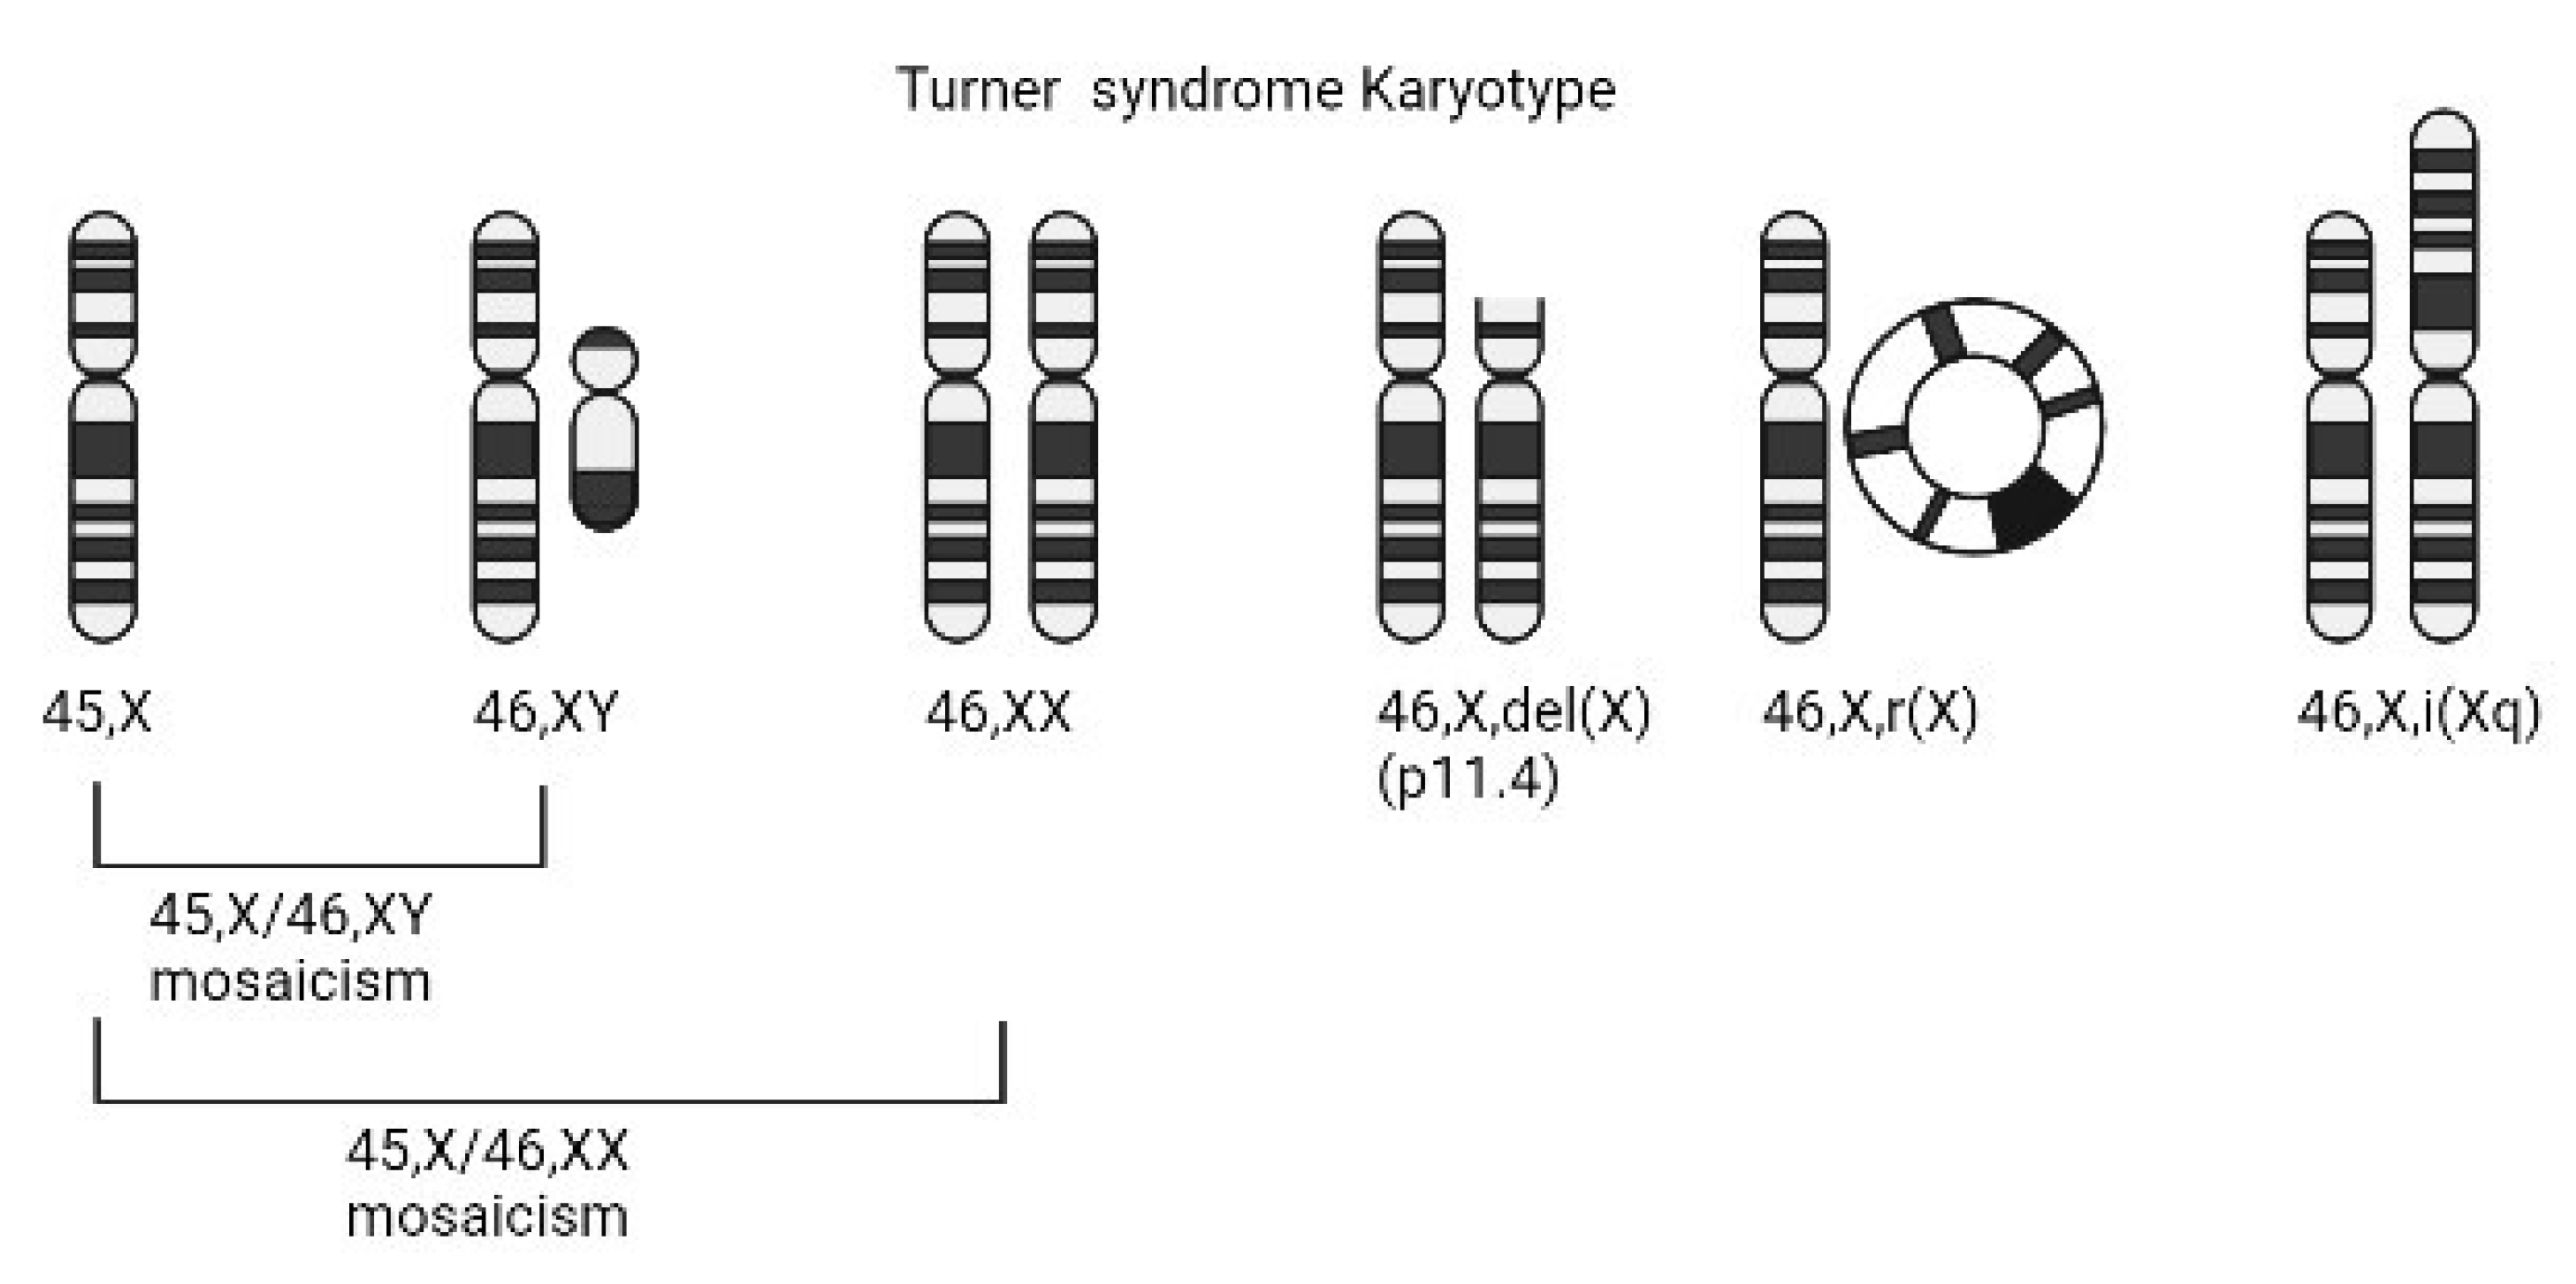 what causes turner syndrome